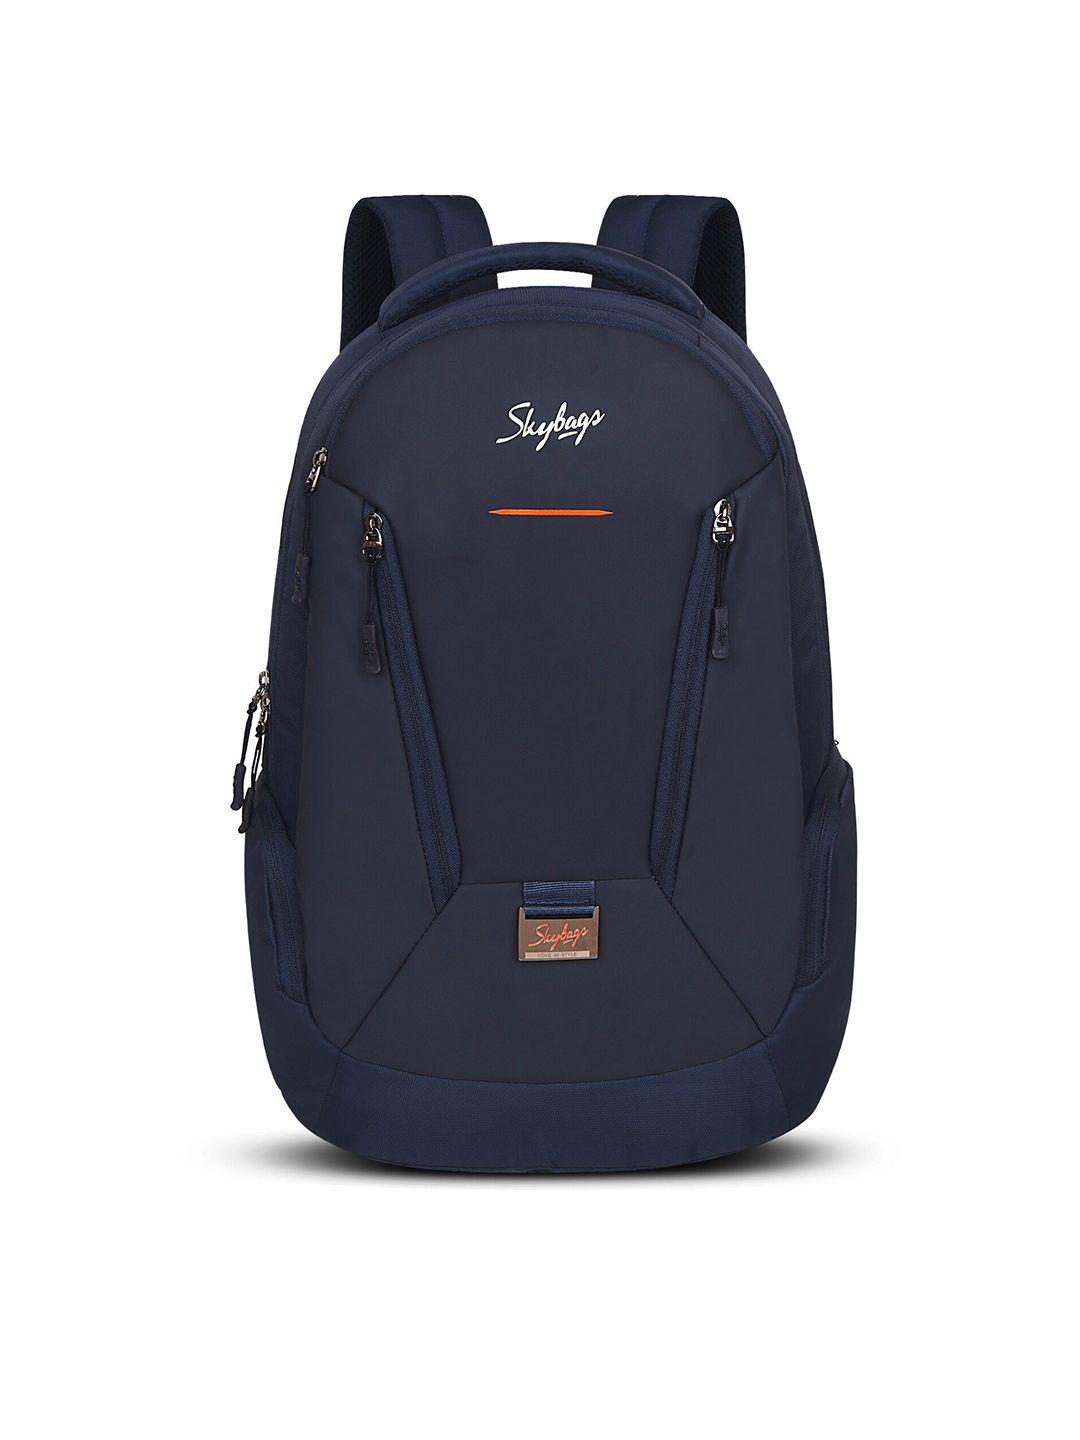 skybags-unisex-navy-blue-solid-backpack